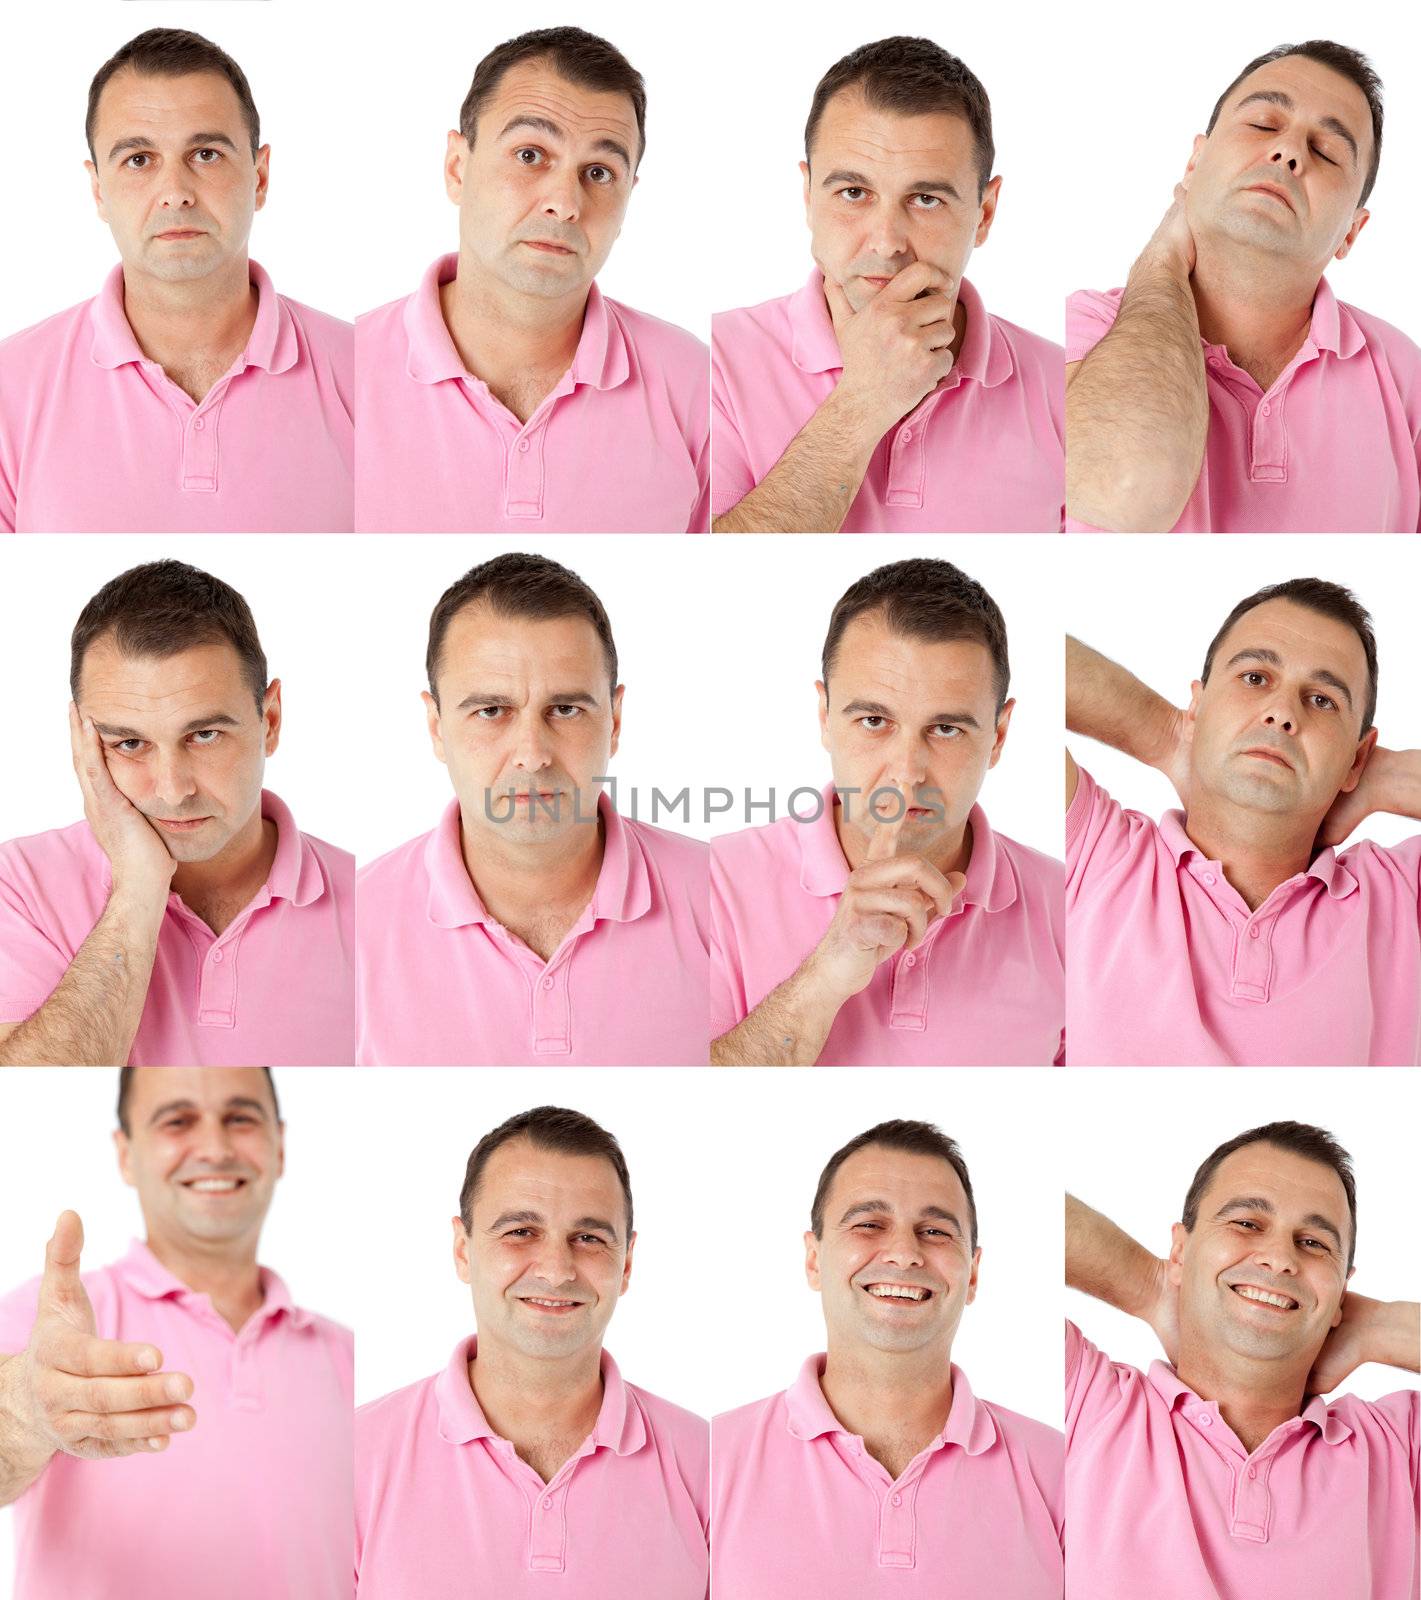 Portraits of man with pink shirt in multiple face expressions and gestures